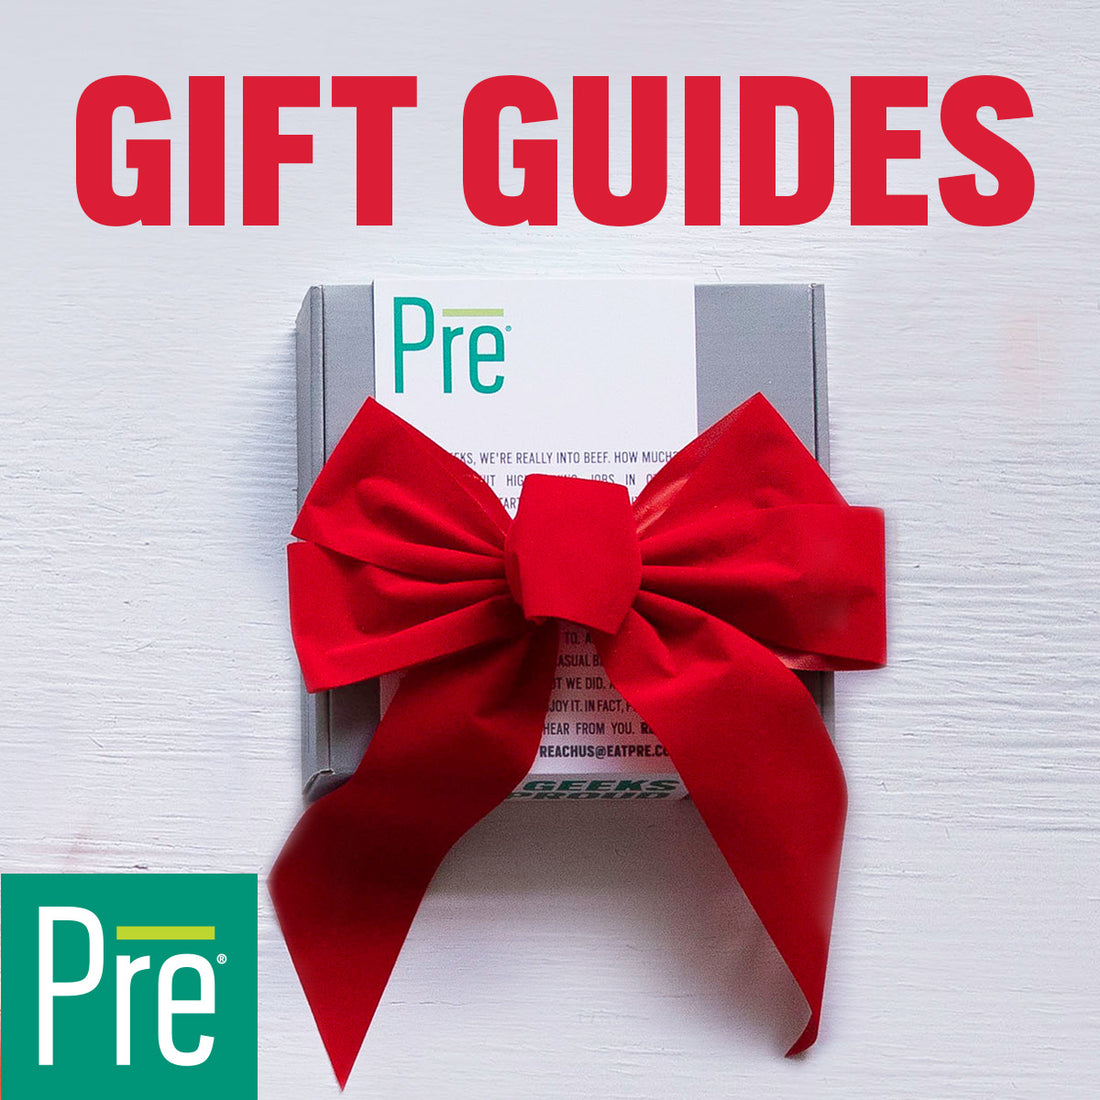 These Geeky Stocking Stuffers Prove that Big Things Come in Small Packages  -  Blog